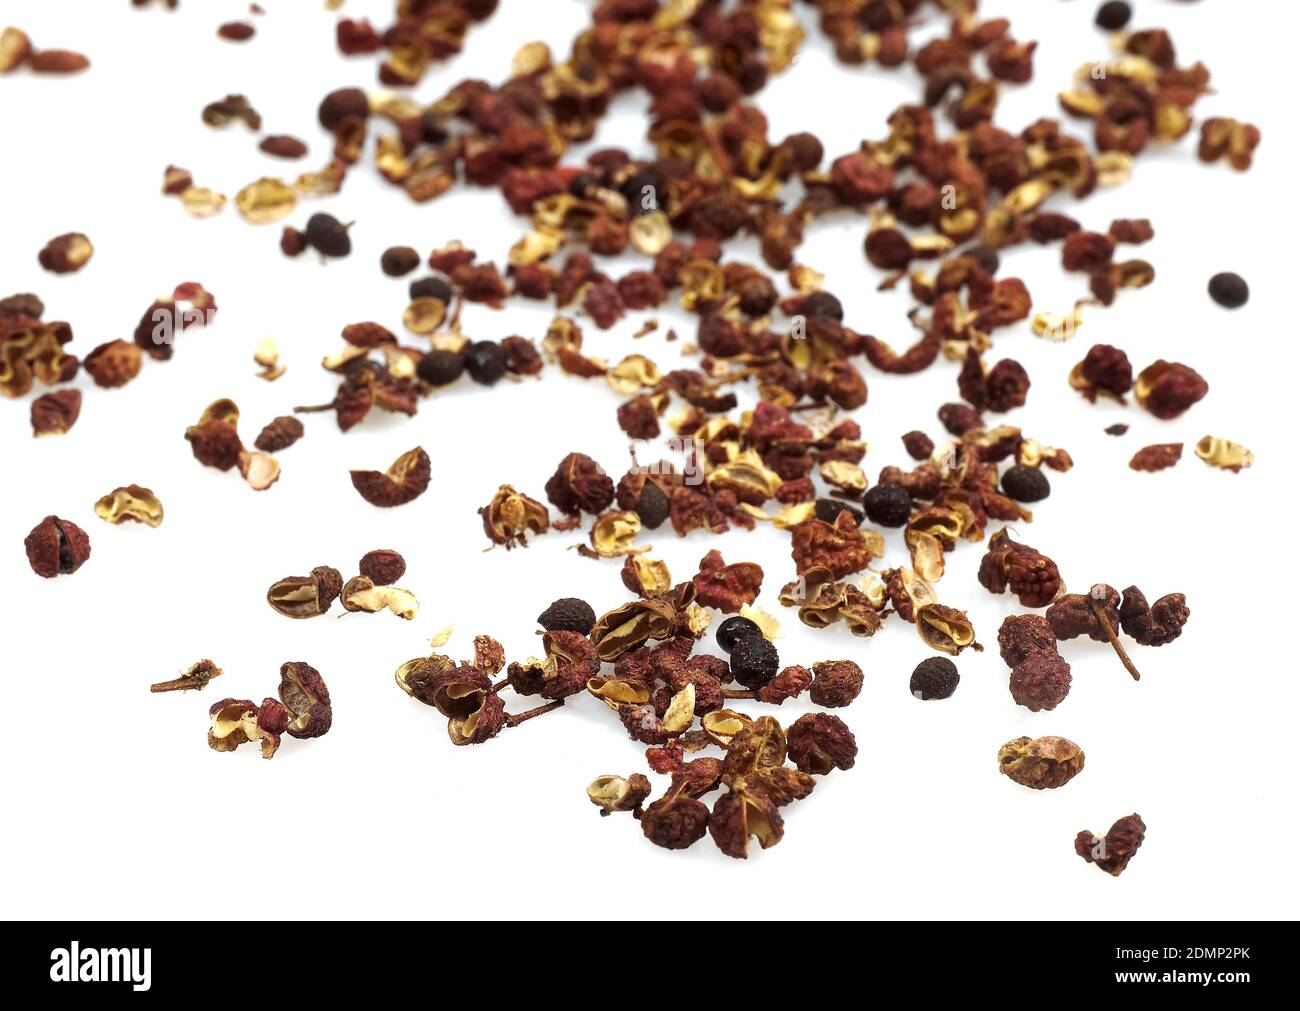 Czechuan or Sichuan Pepper, zanthoxylum simulans against White Background Stock Photo